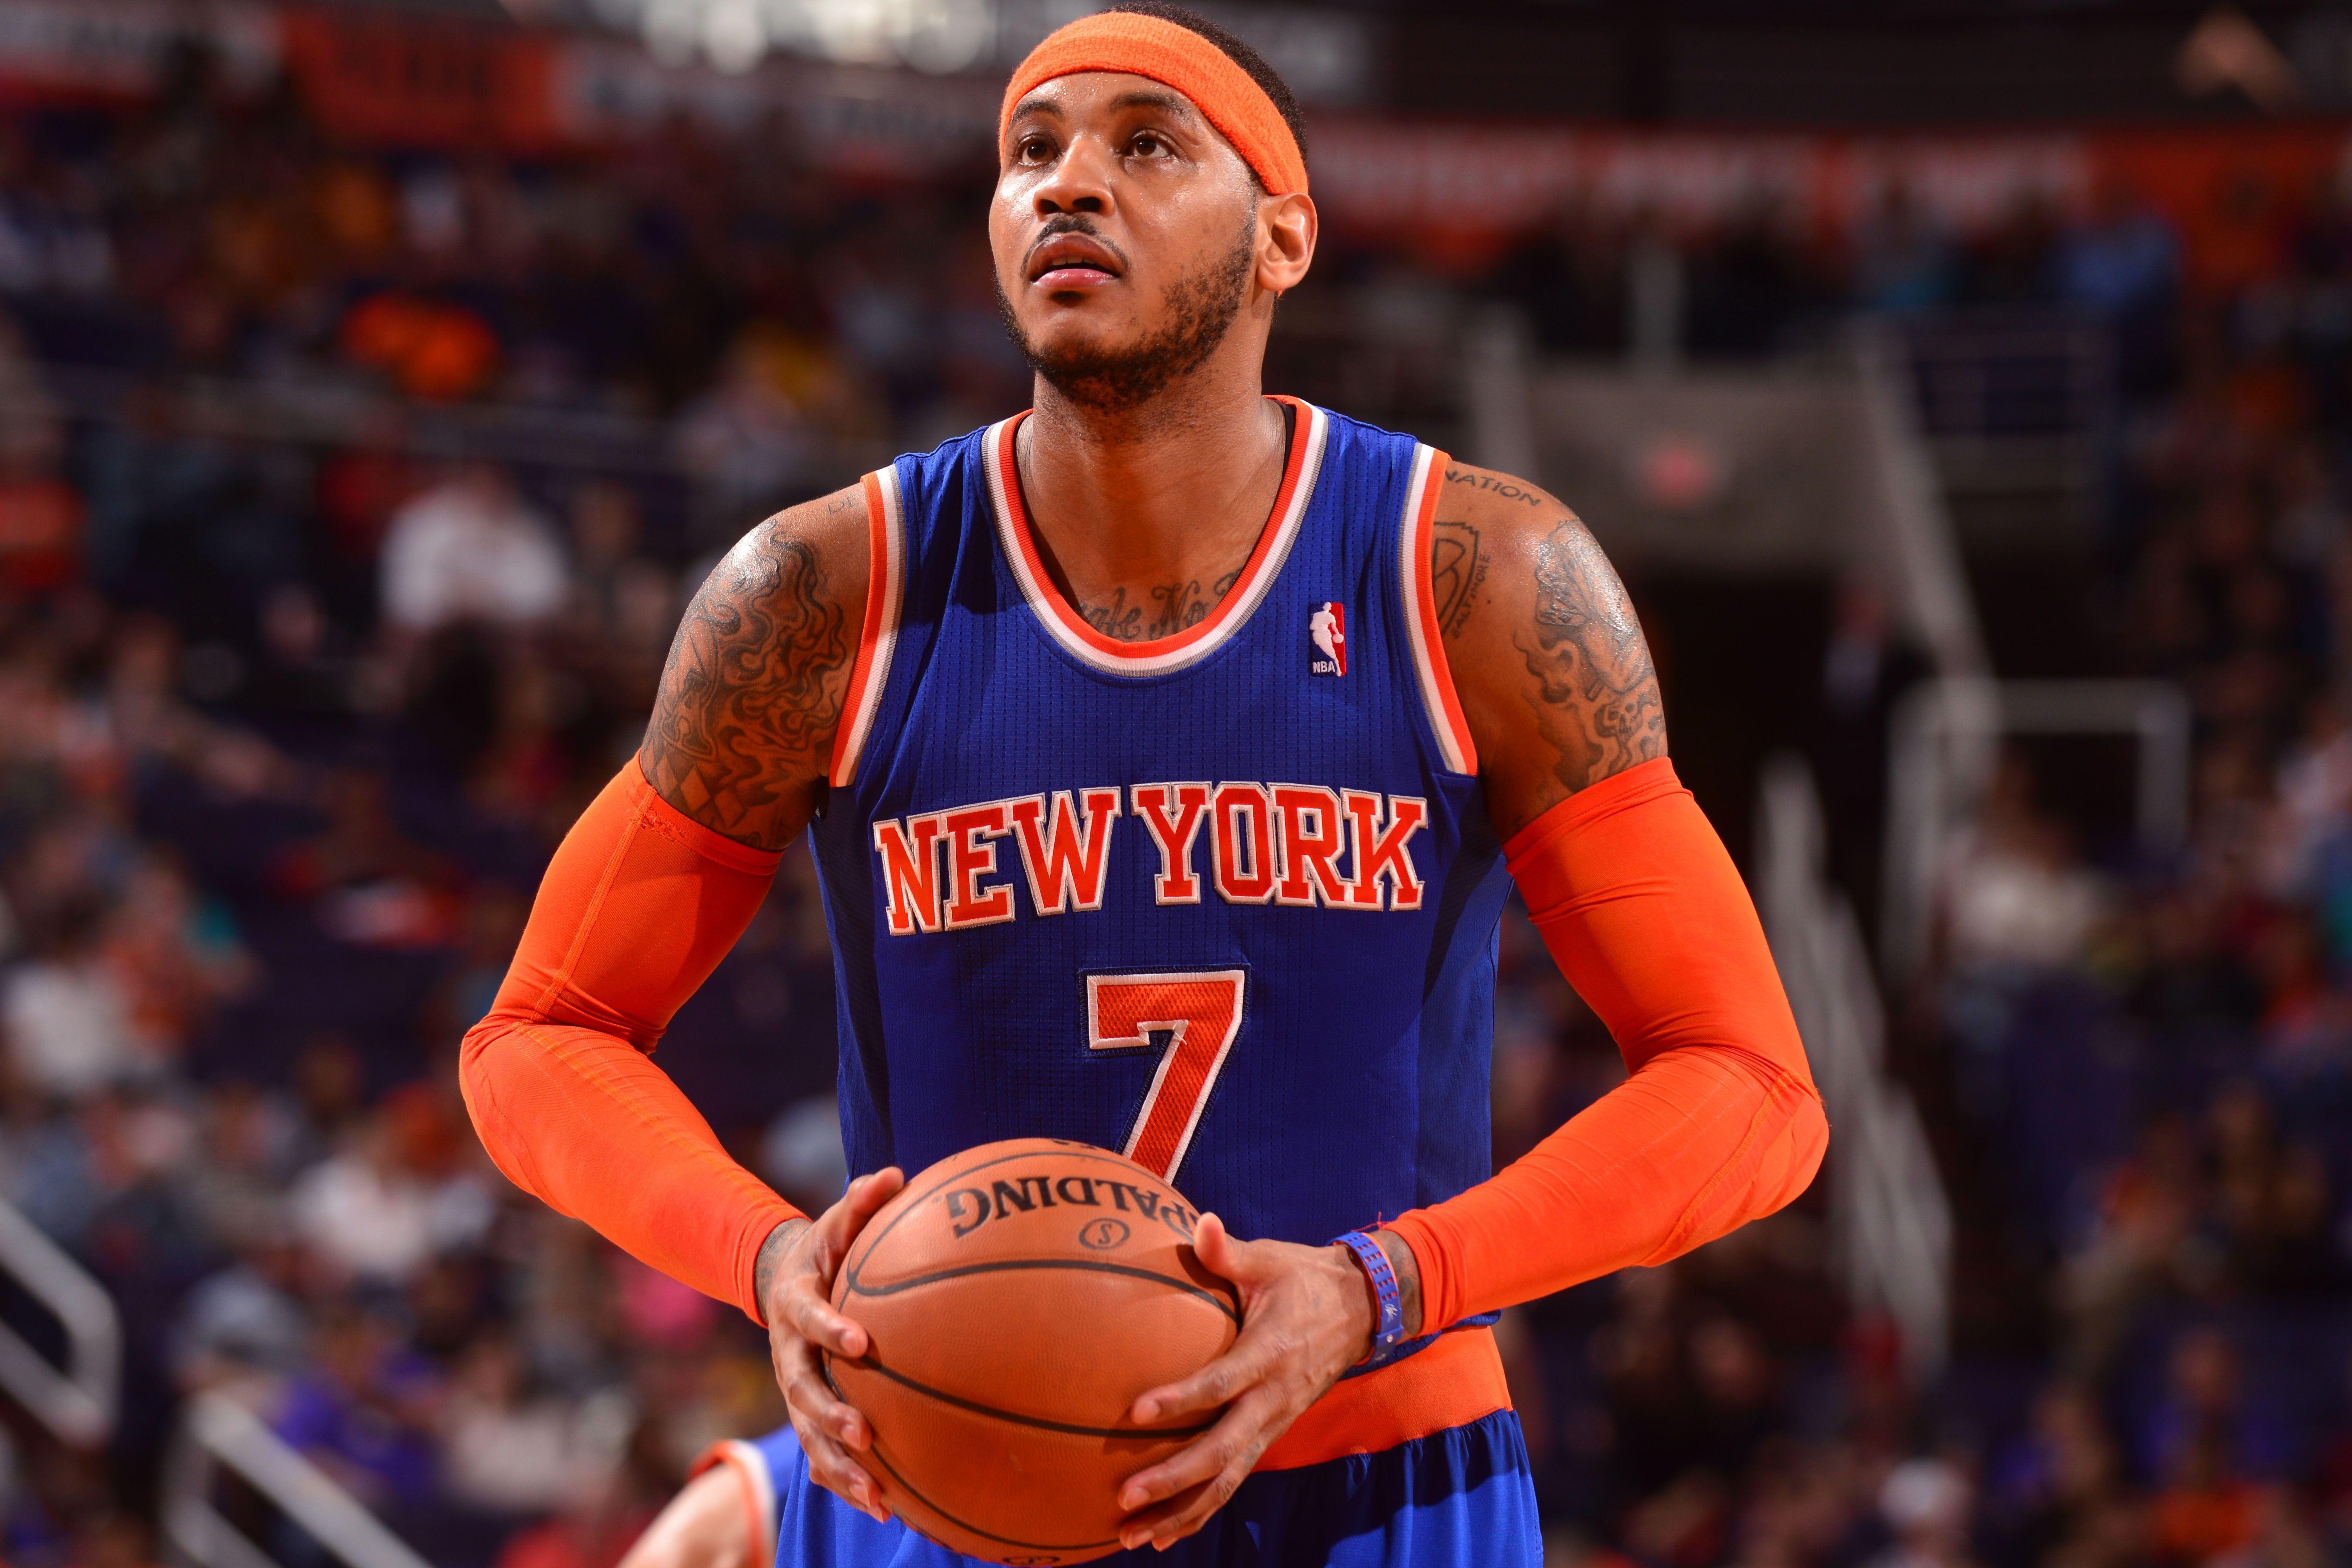 Carmelo Anthony Wallpaper High Resolution and Quality Download